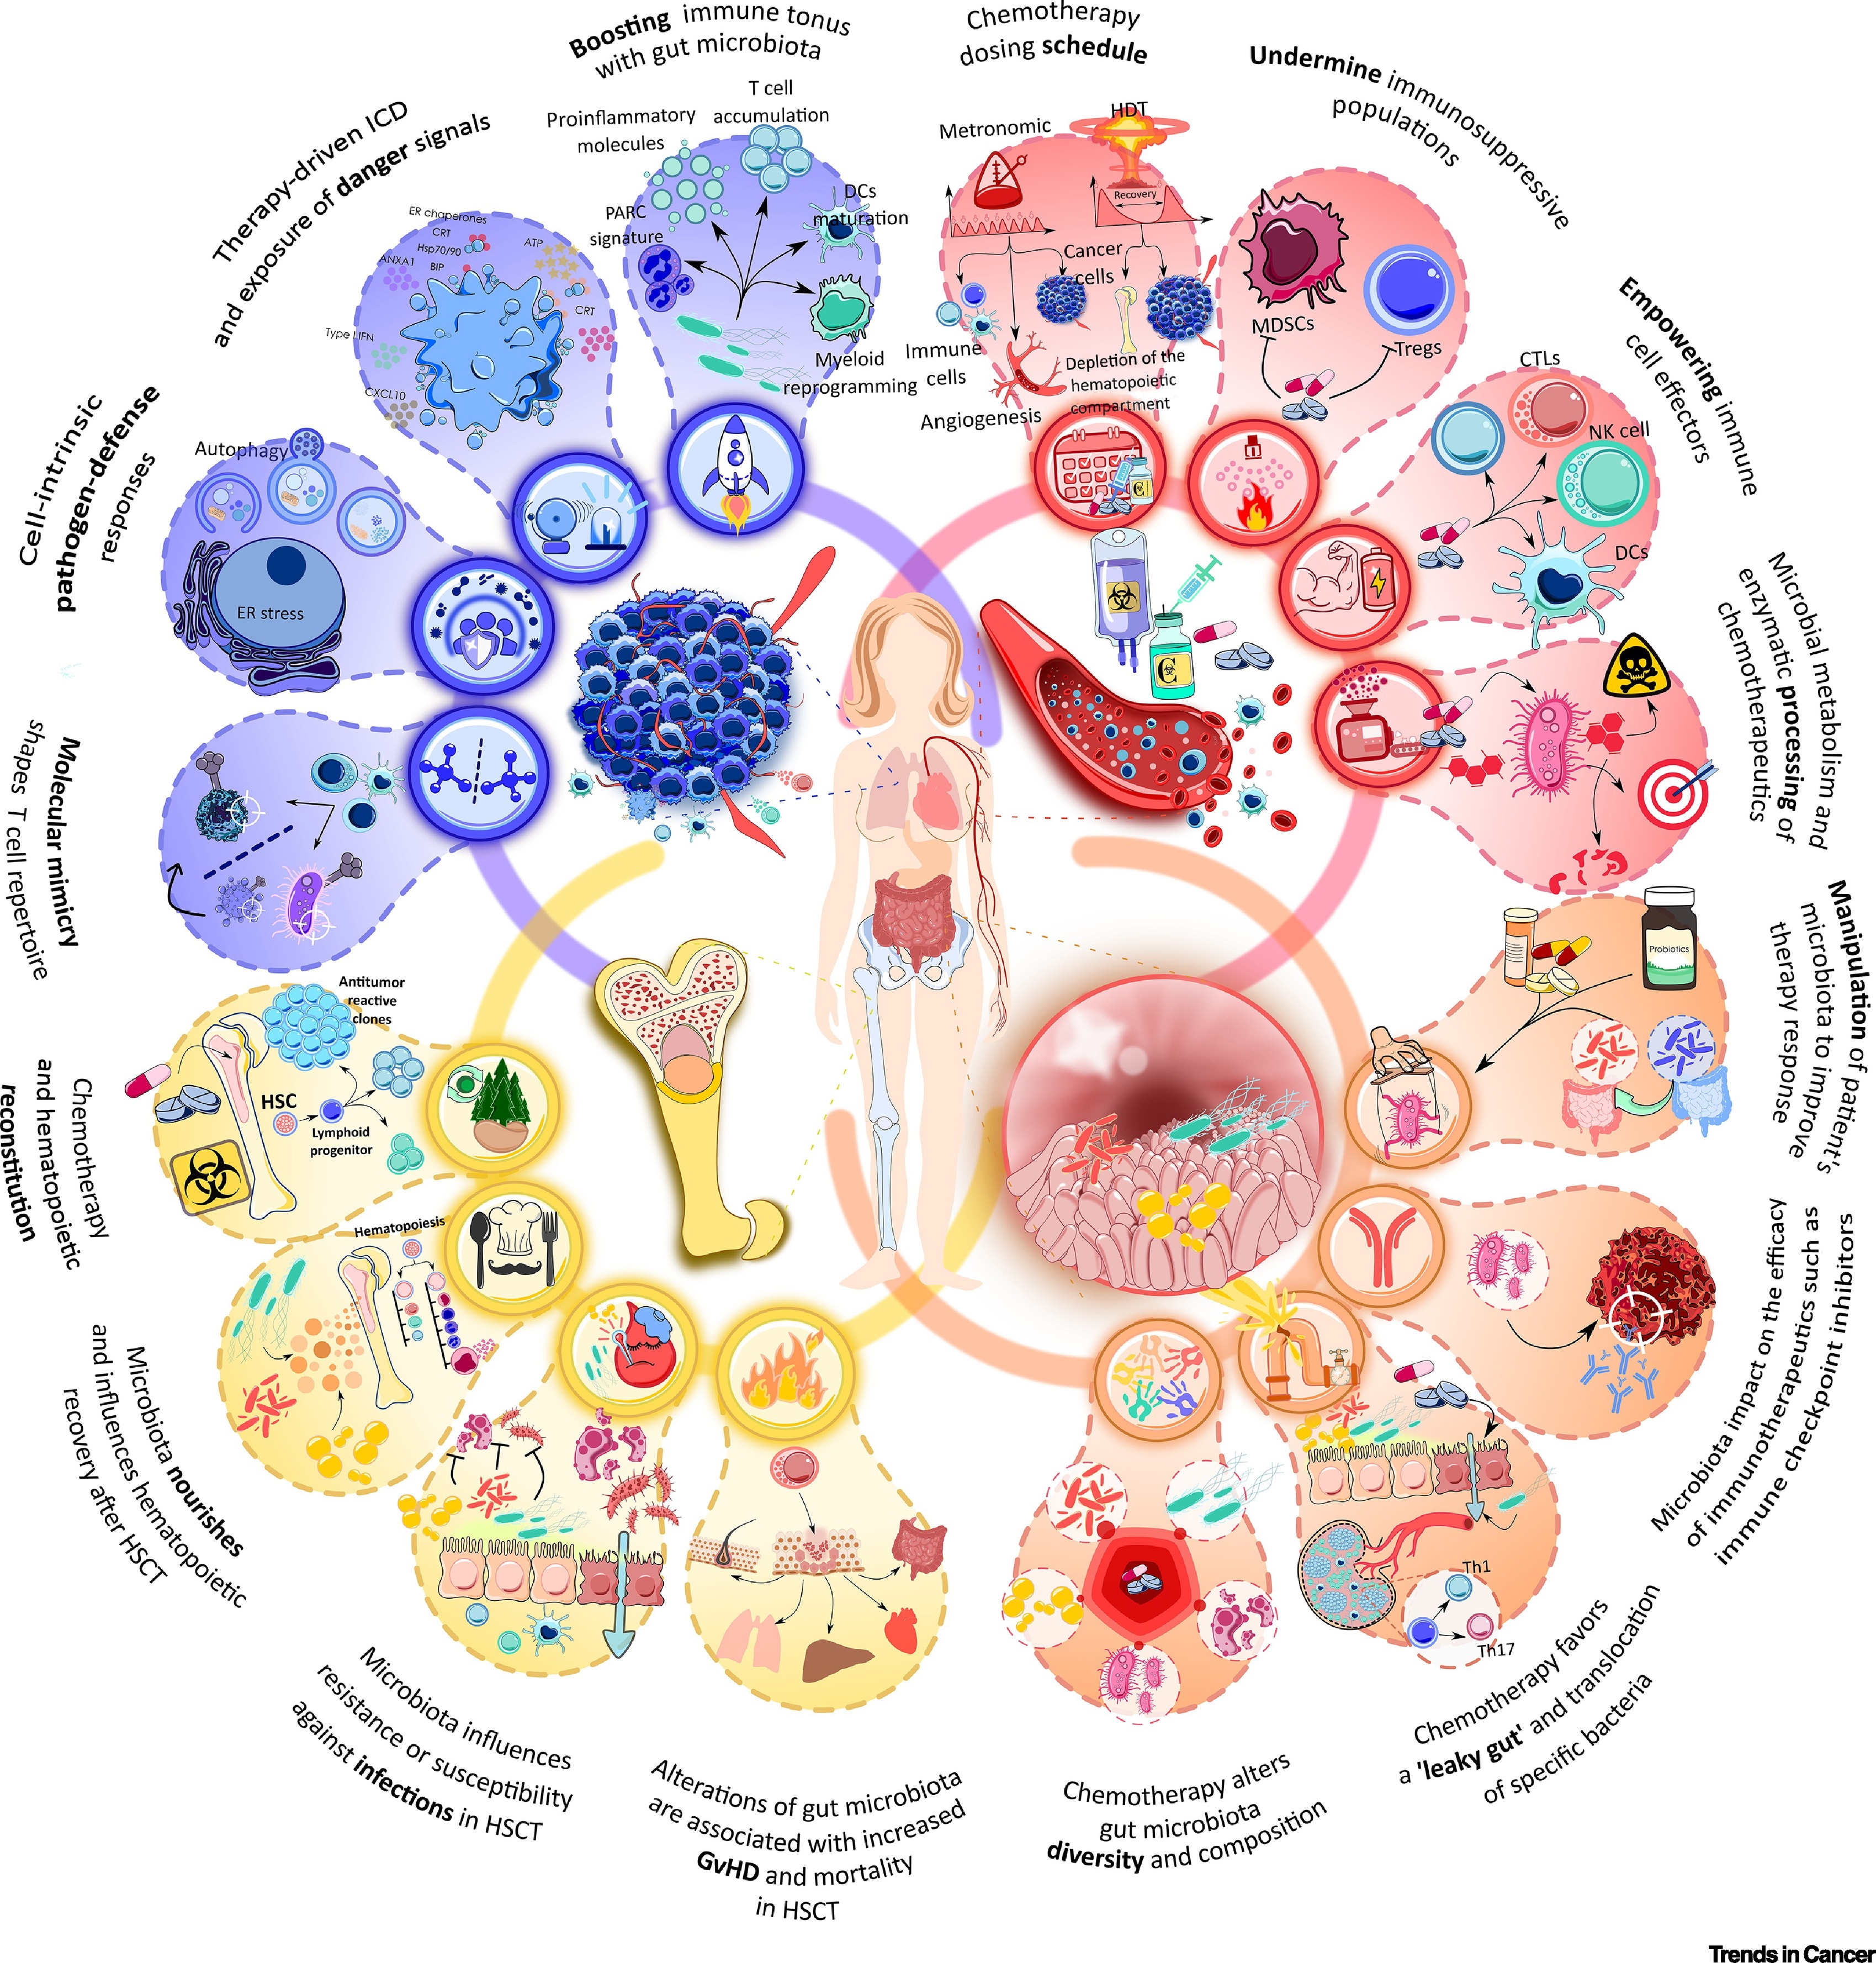 ROLE OF IMMUNOMODULATION IN CANCER TREATMENT – THE DAWN AND THE FUTURE